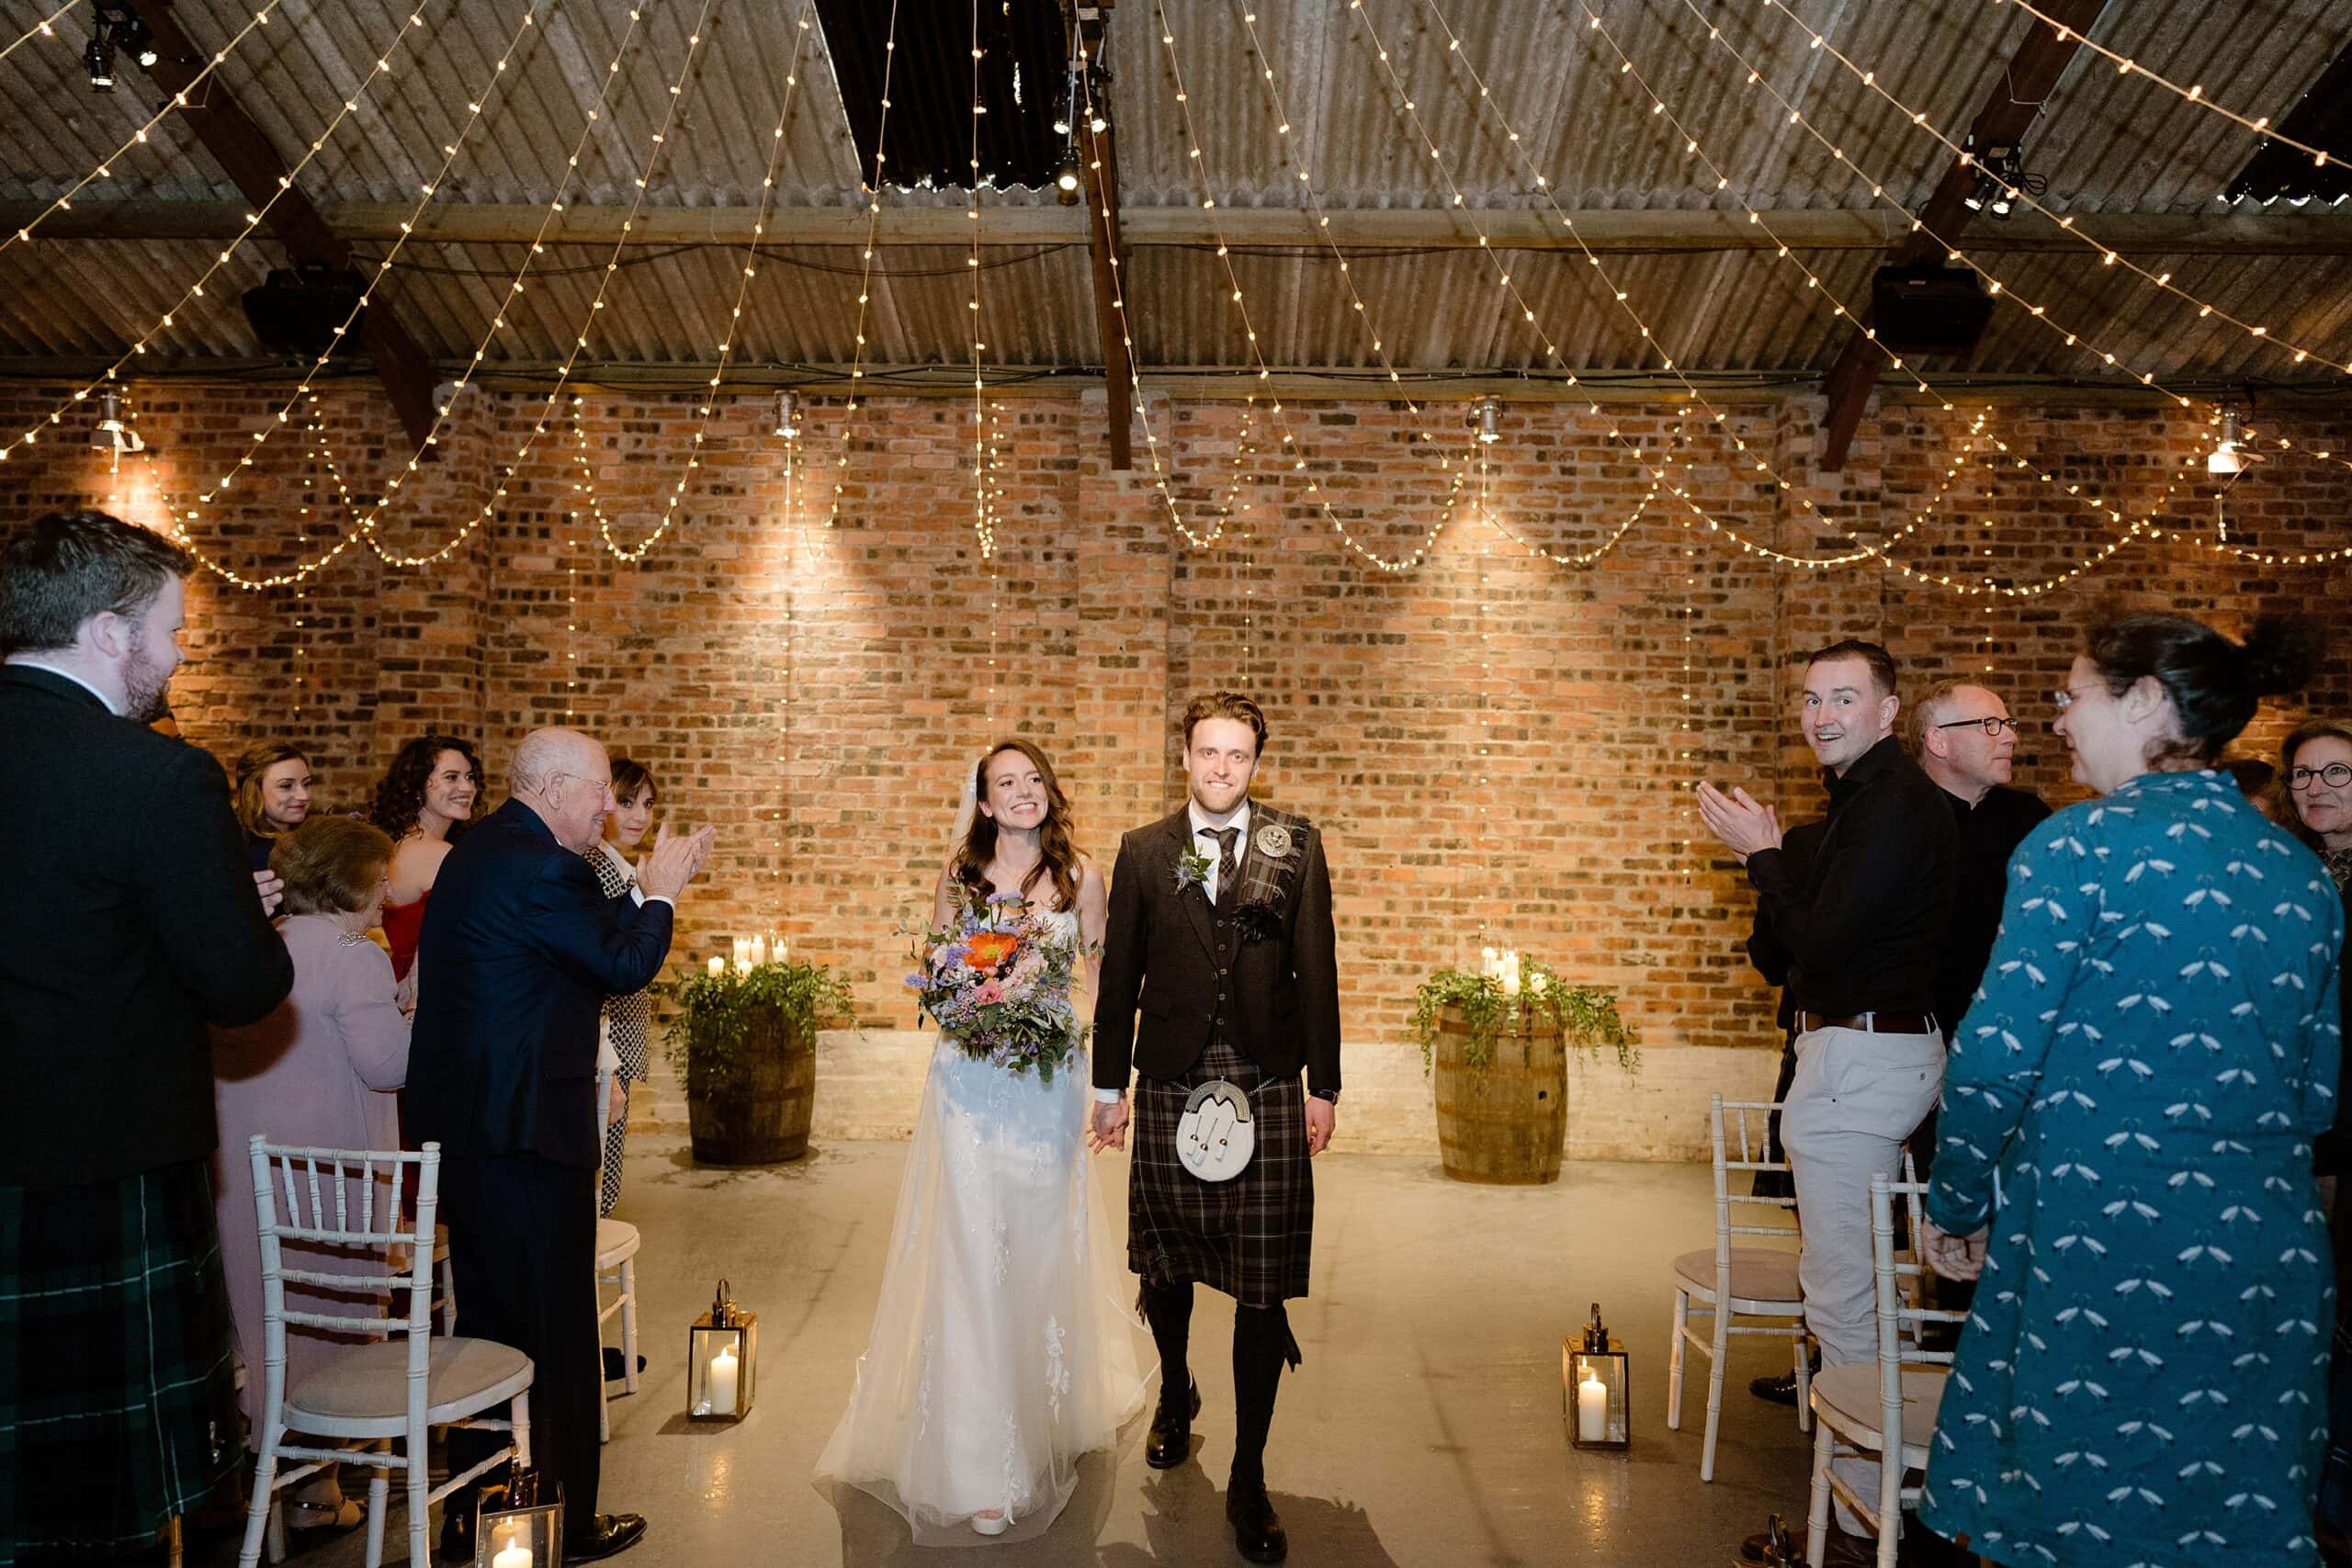 guests applaud as the bride and groom hold hands and smile as they exit down the aisle beneath festoon lights following their wedding ceremony captured by st andrews wedding photographer in scotland